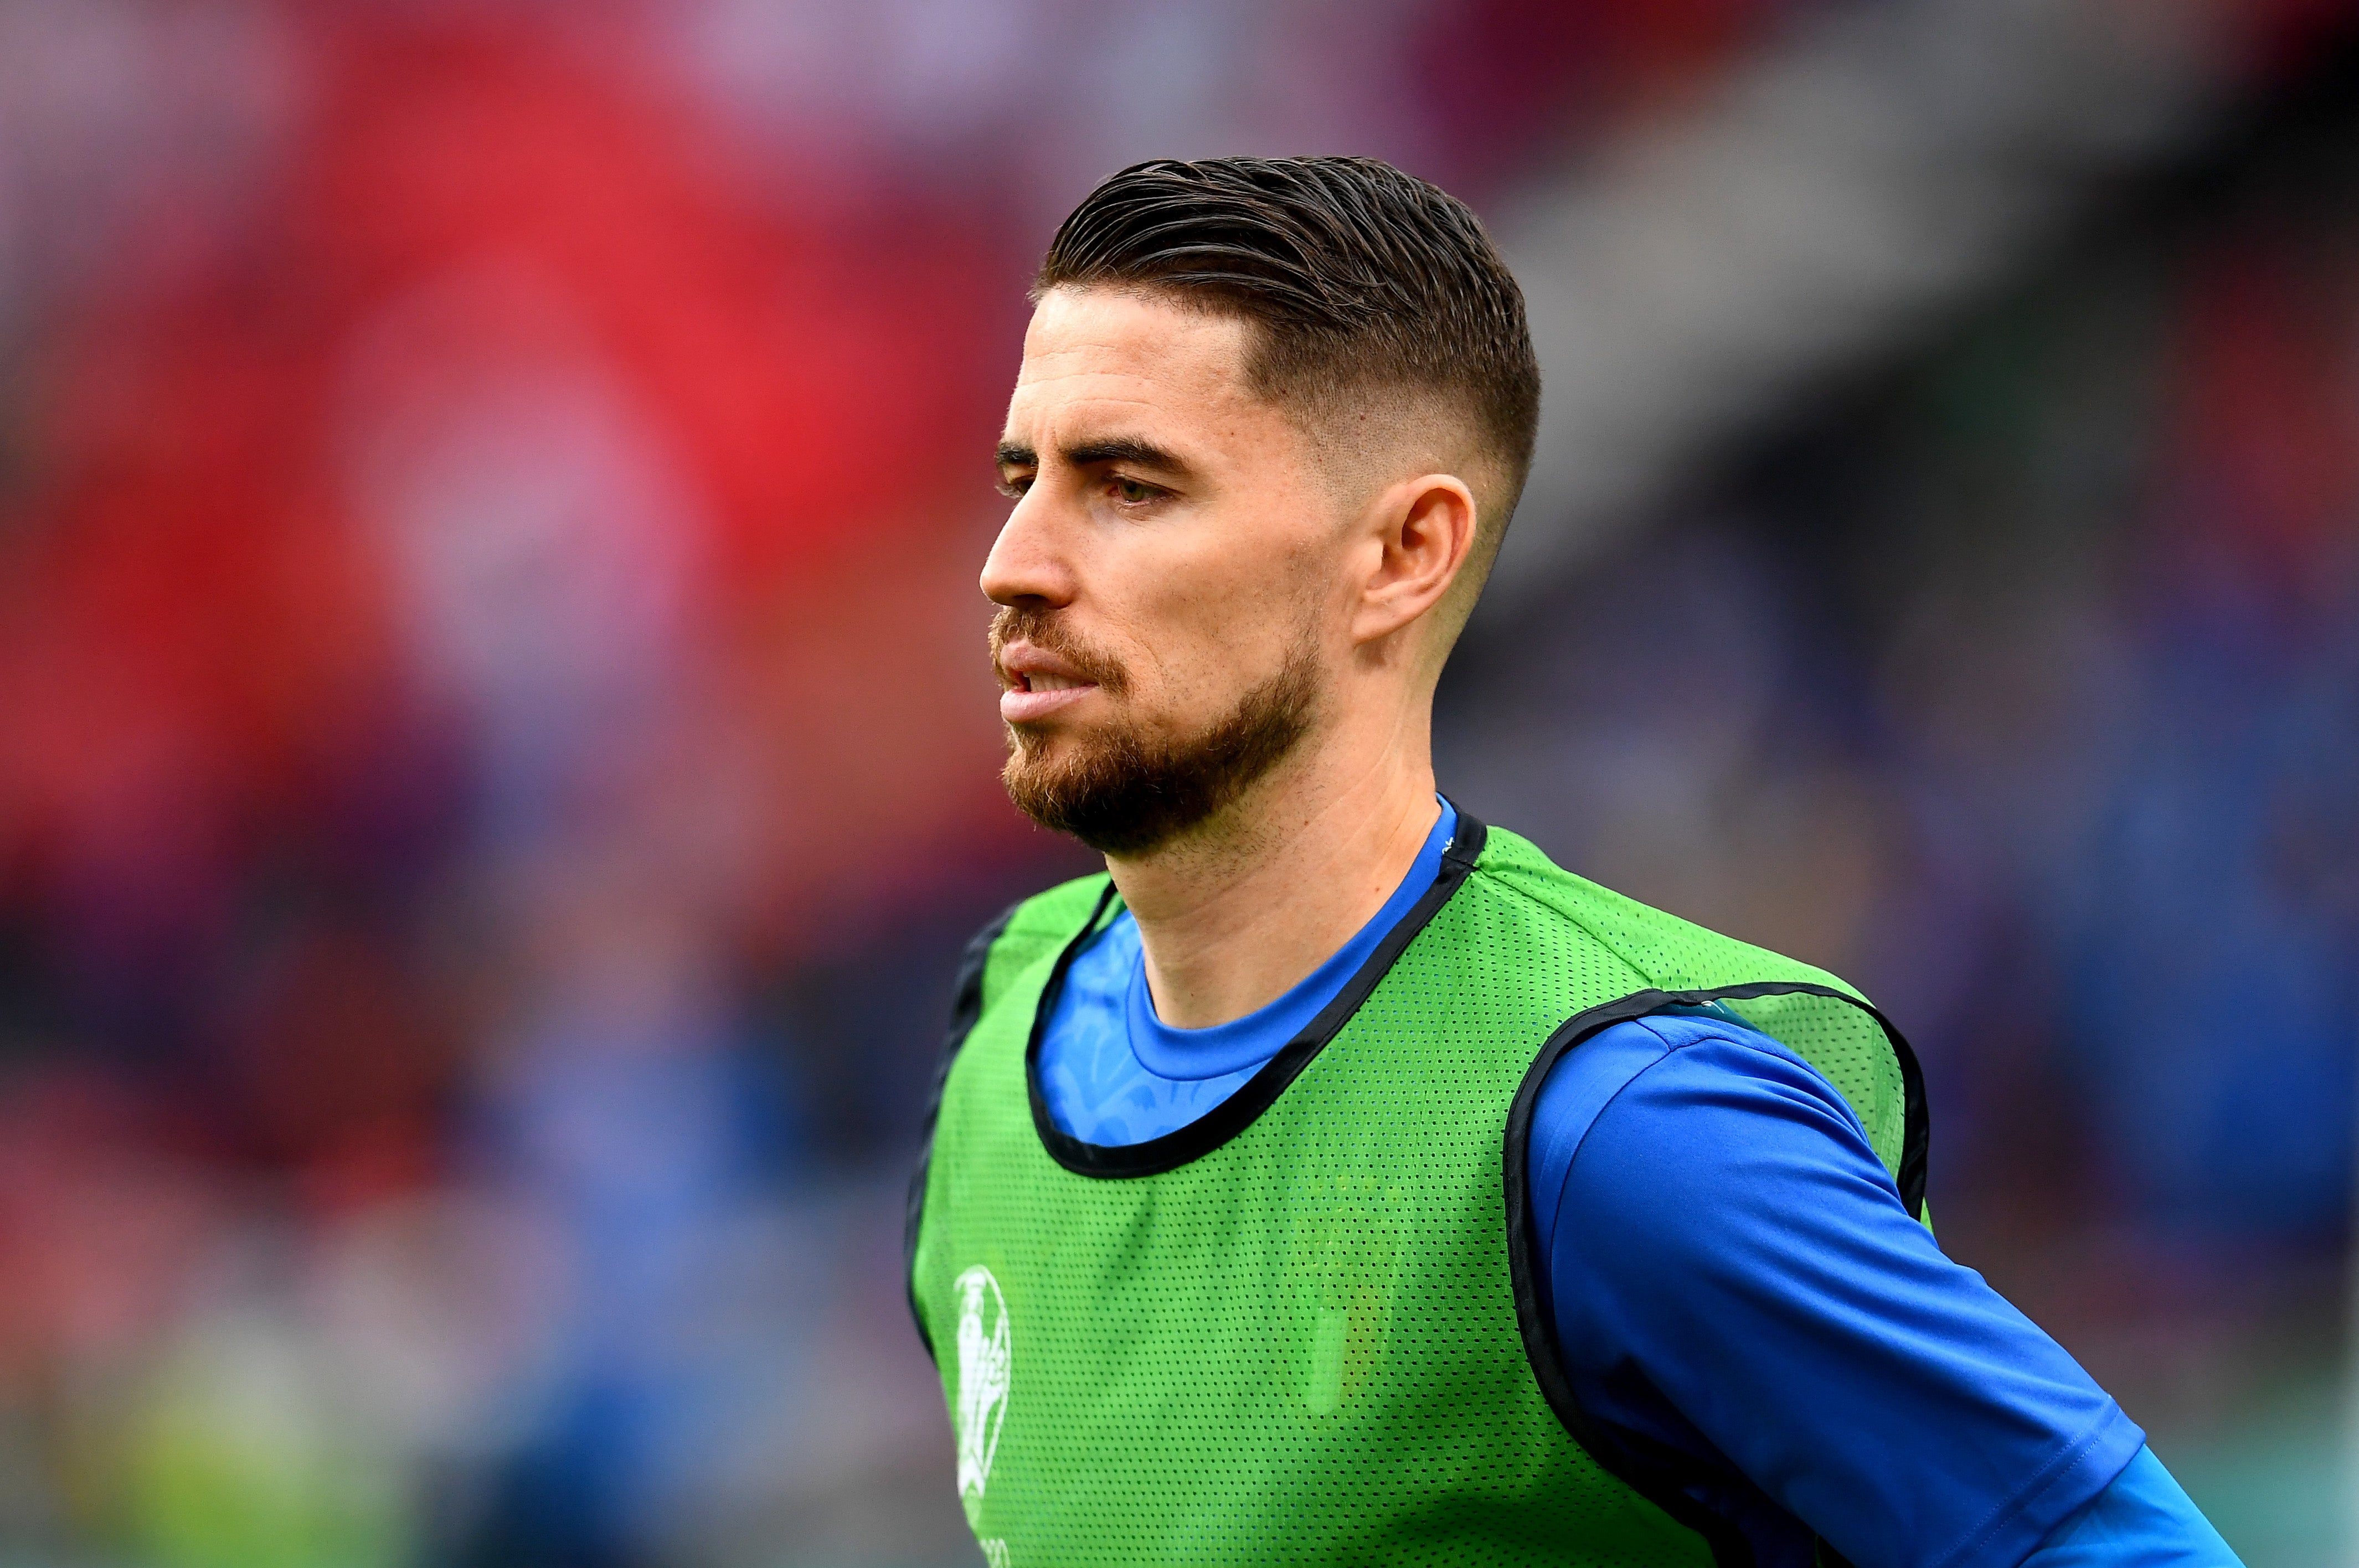 Jorginho was part of the Italy squad who have missed out on World Cup qualification